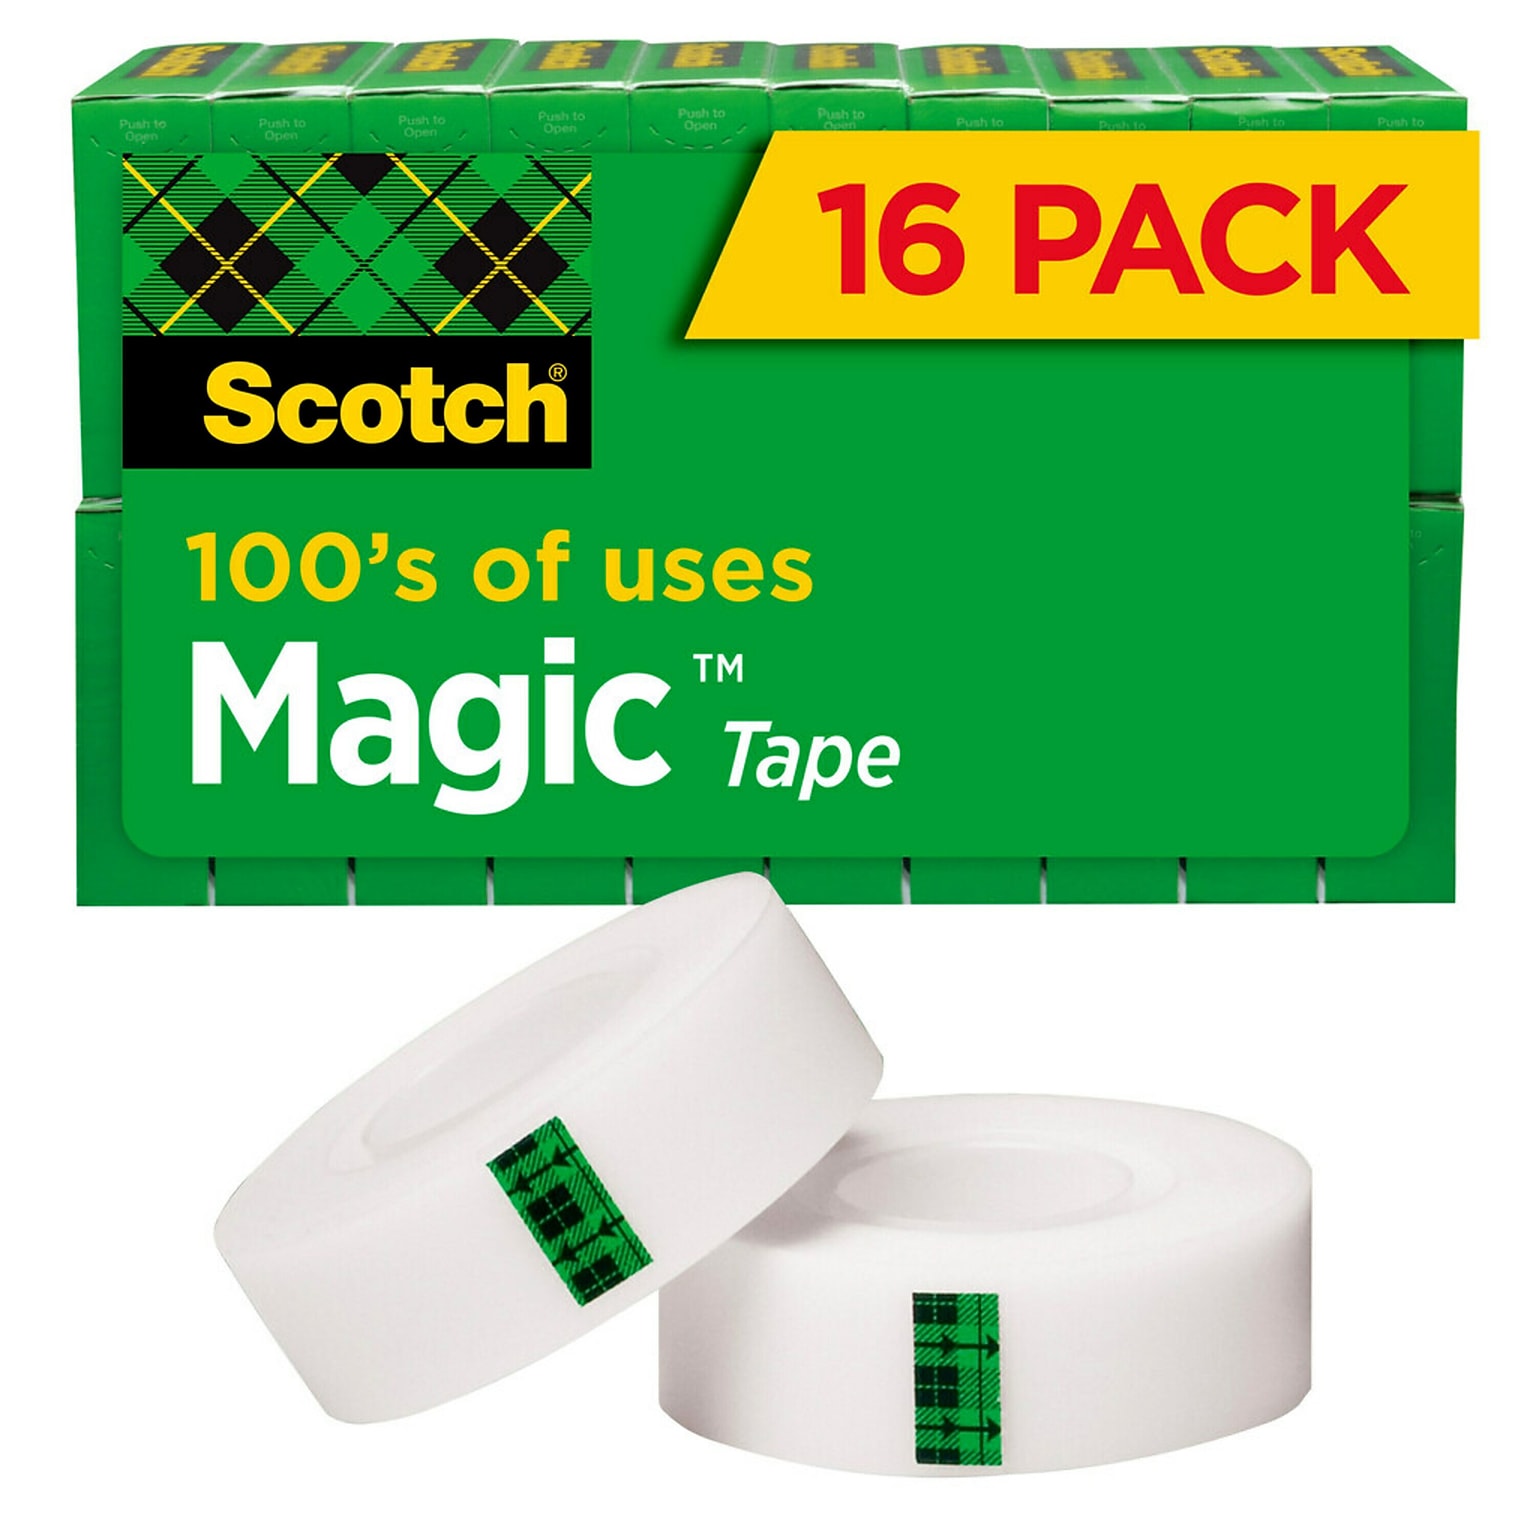 Scotch Magic Invisible Tape Refill, 3/4 x 27.77 yds., 16 Rolls/Pack (810K16)